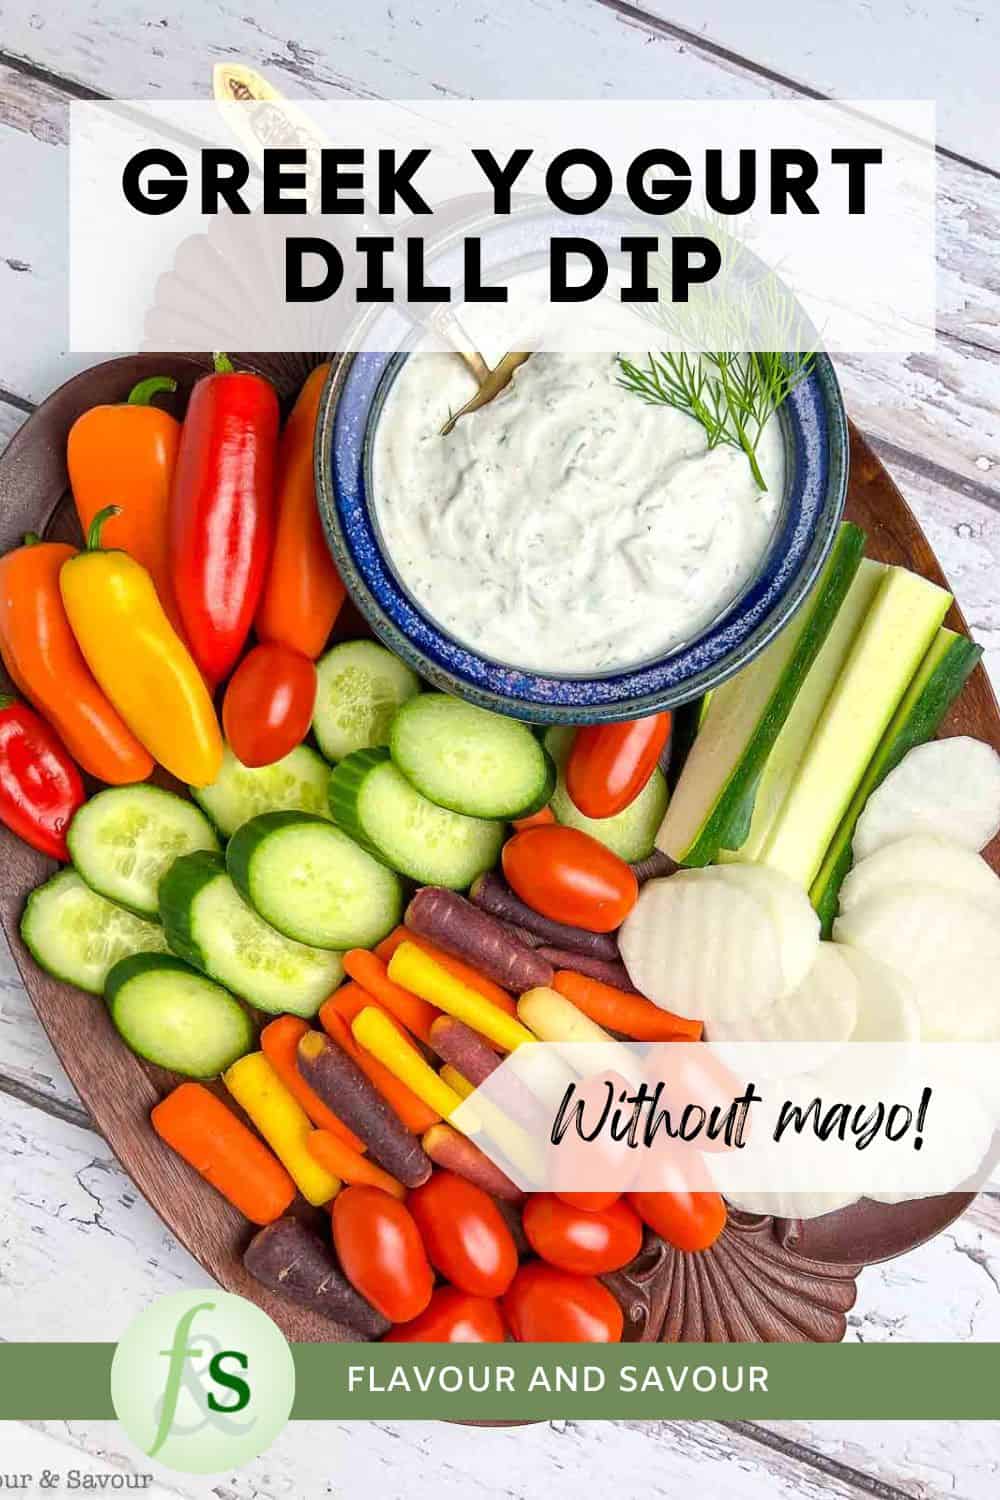 Image with text overlay for Greek yogurt dill dip without may.